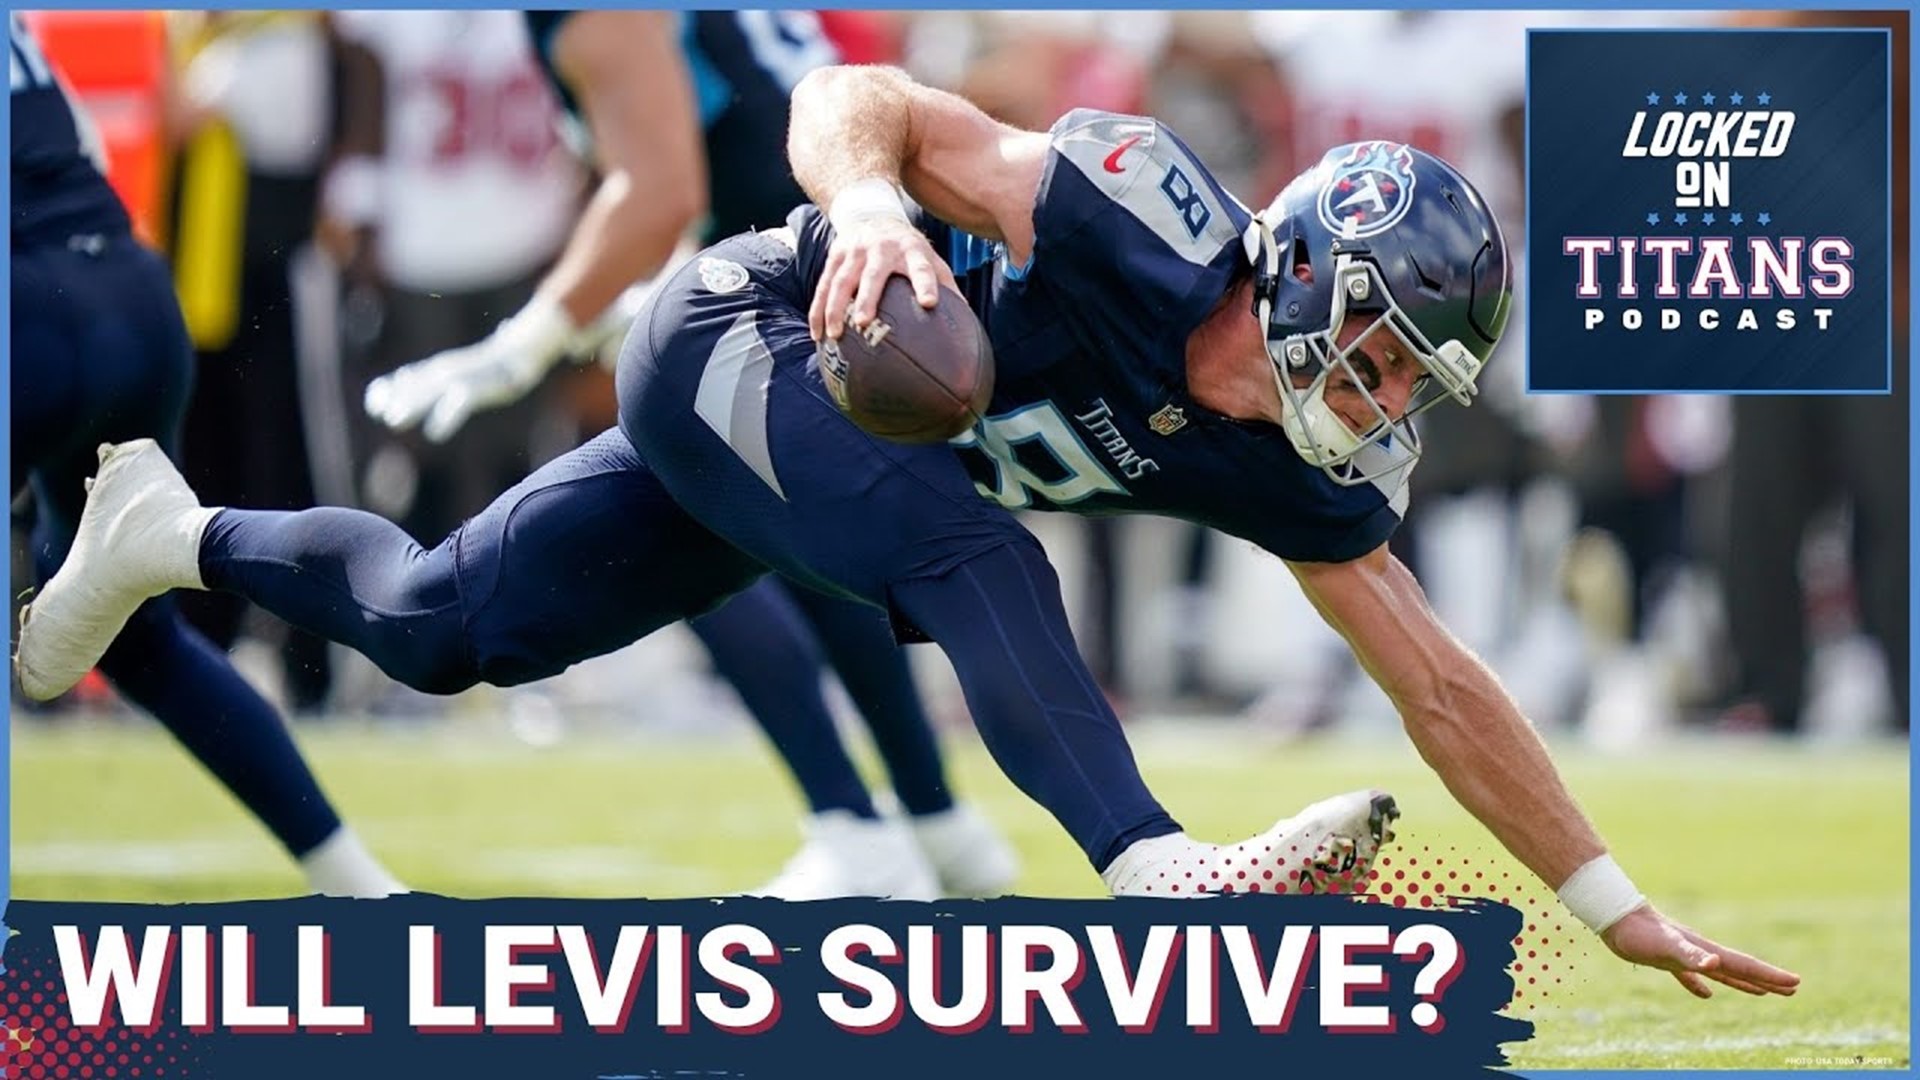 The Tennessee Titans will travel on the road again to play the Jacksonville Jaguars in Week 11 and the real question is can Will Levis survive behind this line?